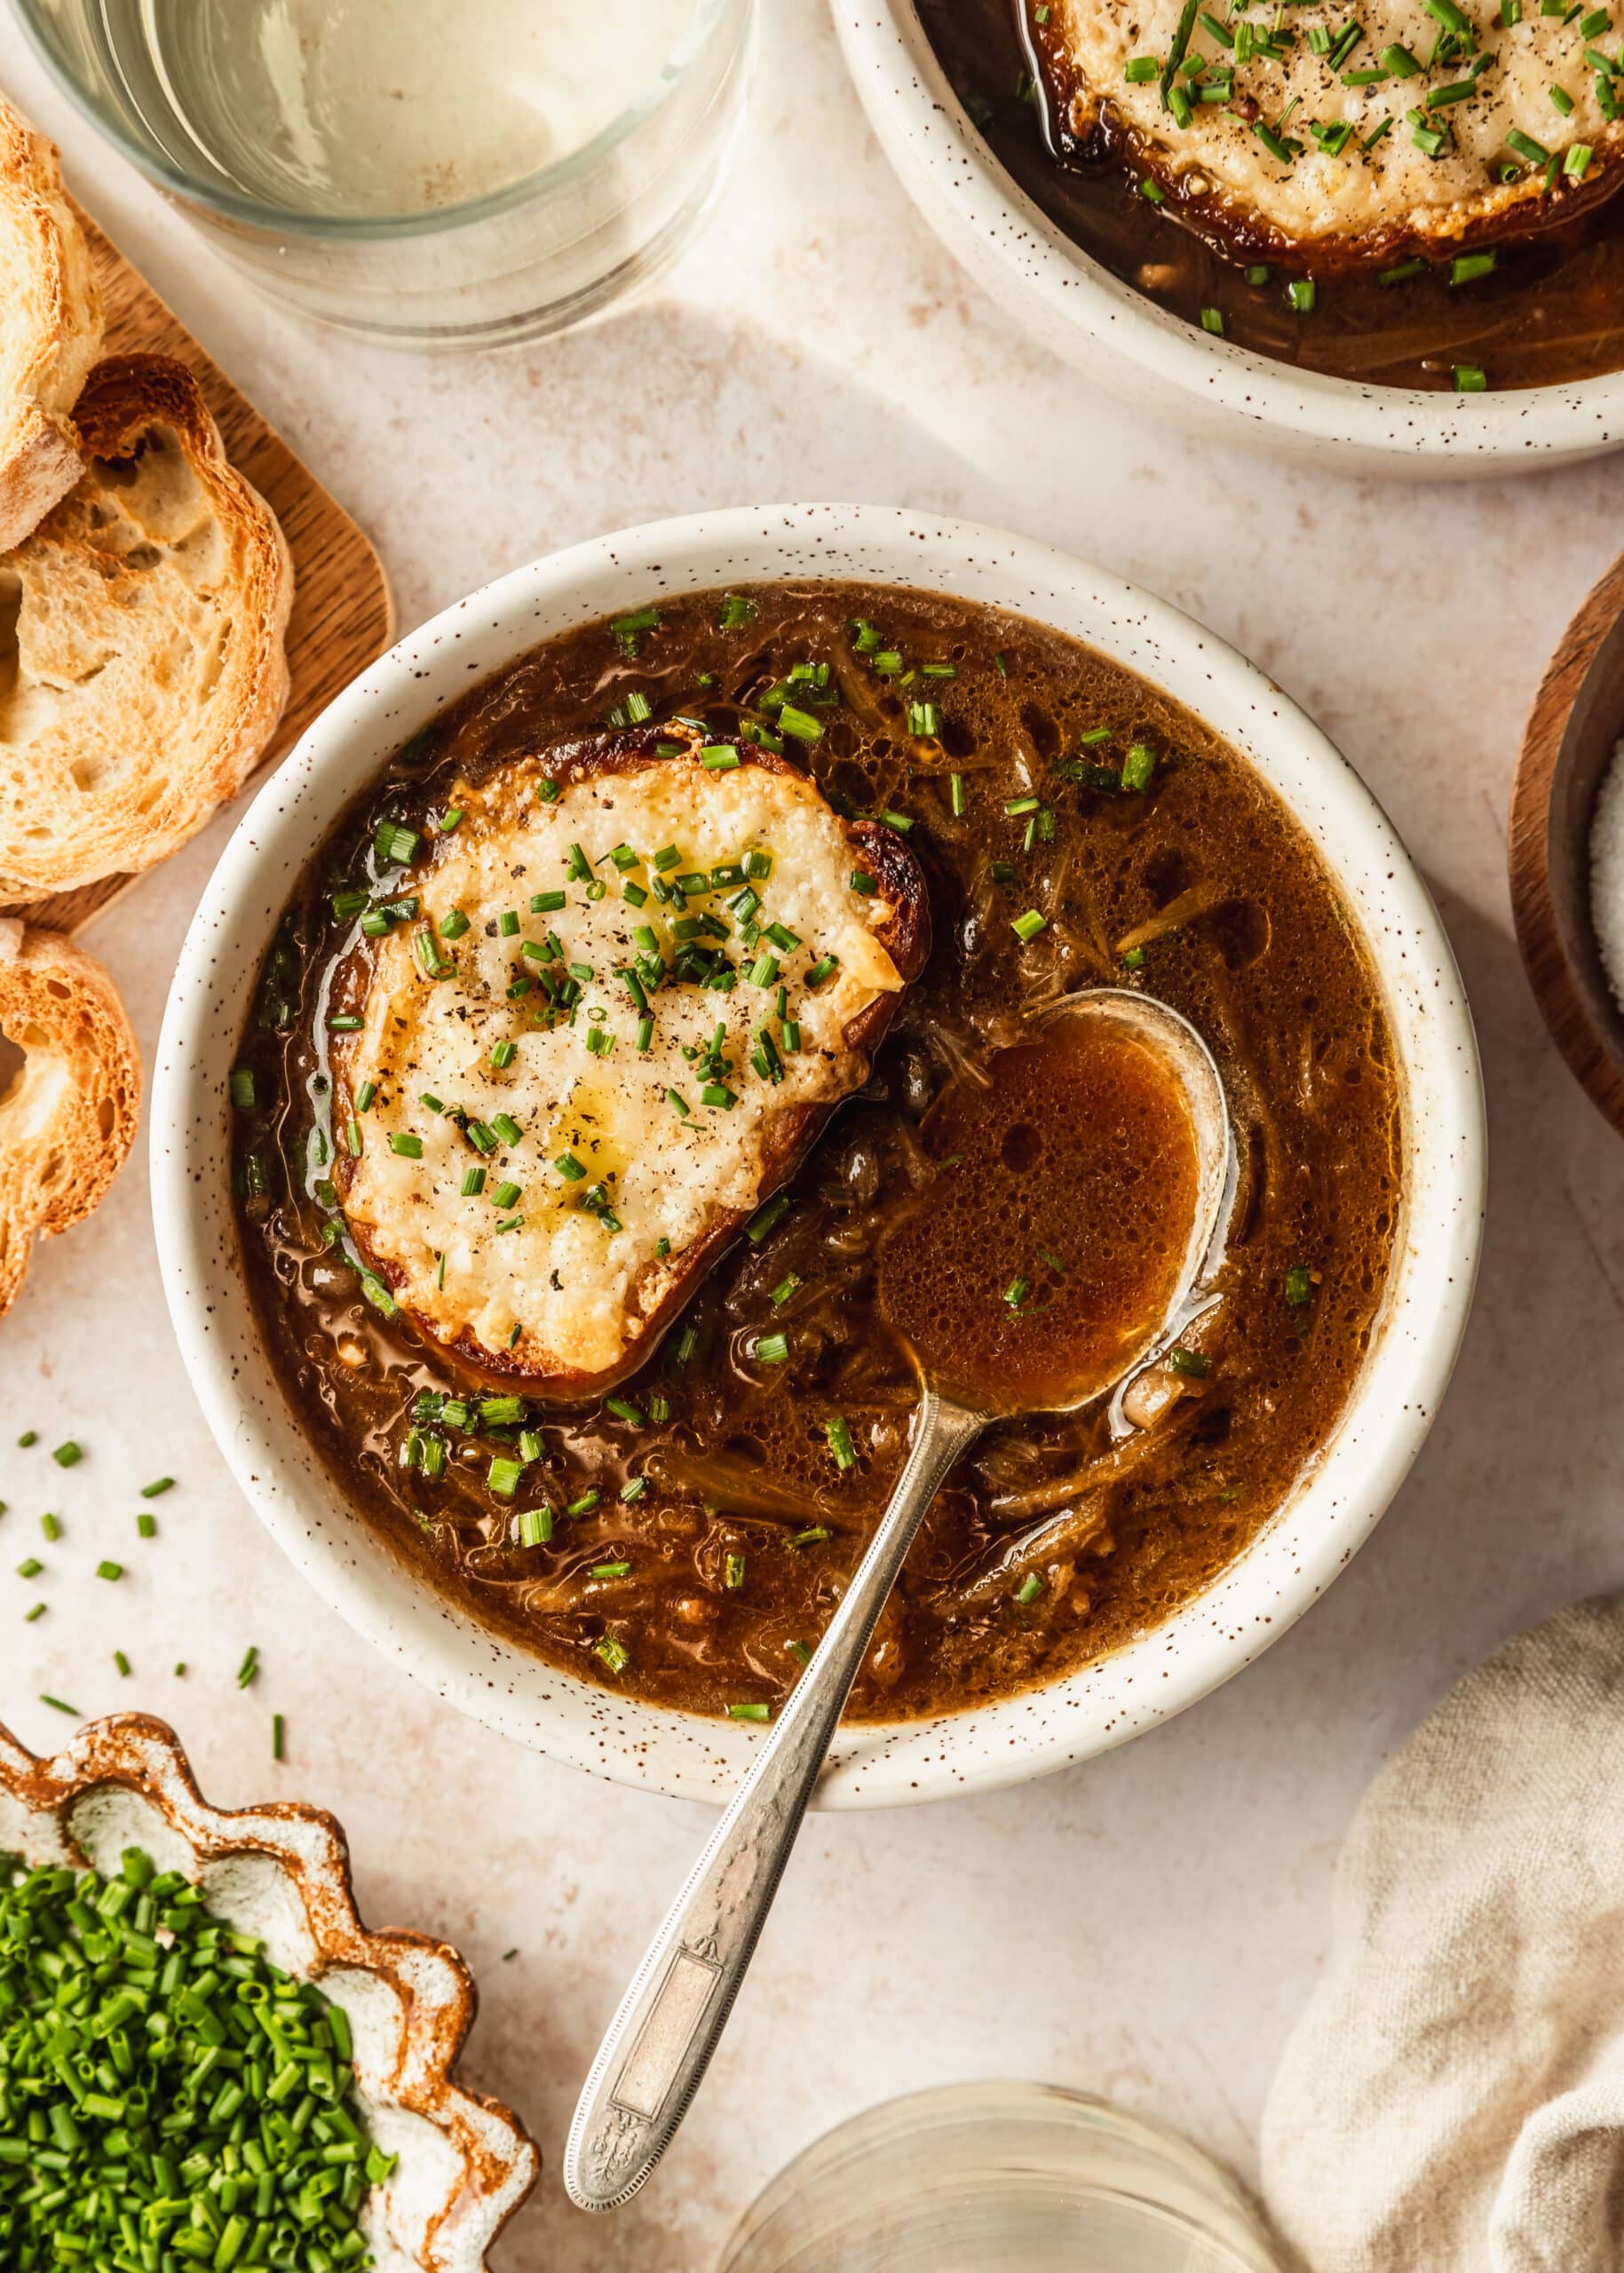 French shallot soup in a white bowl on a beige counter next to bread, a brown bowl of chives, and white wine.